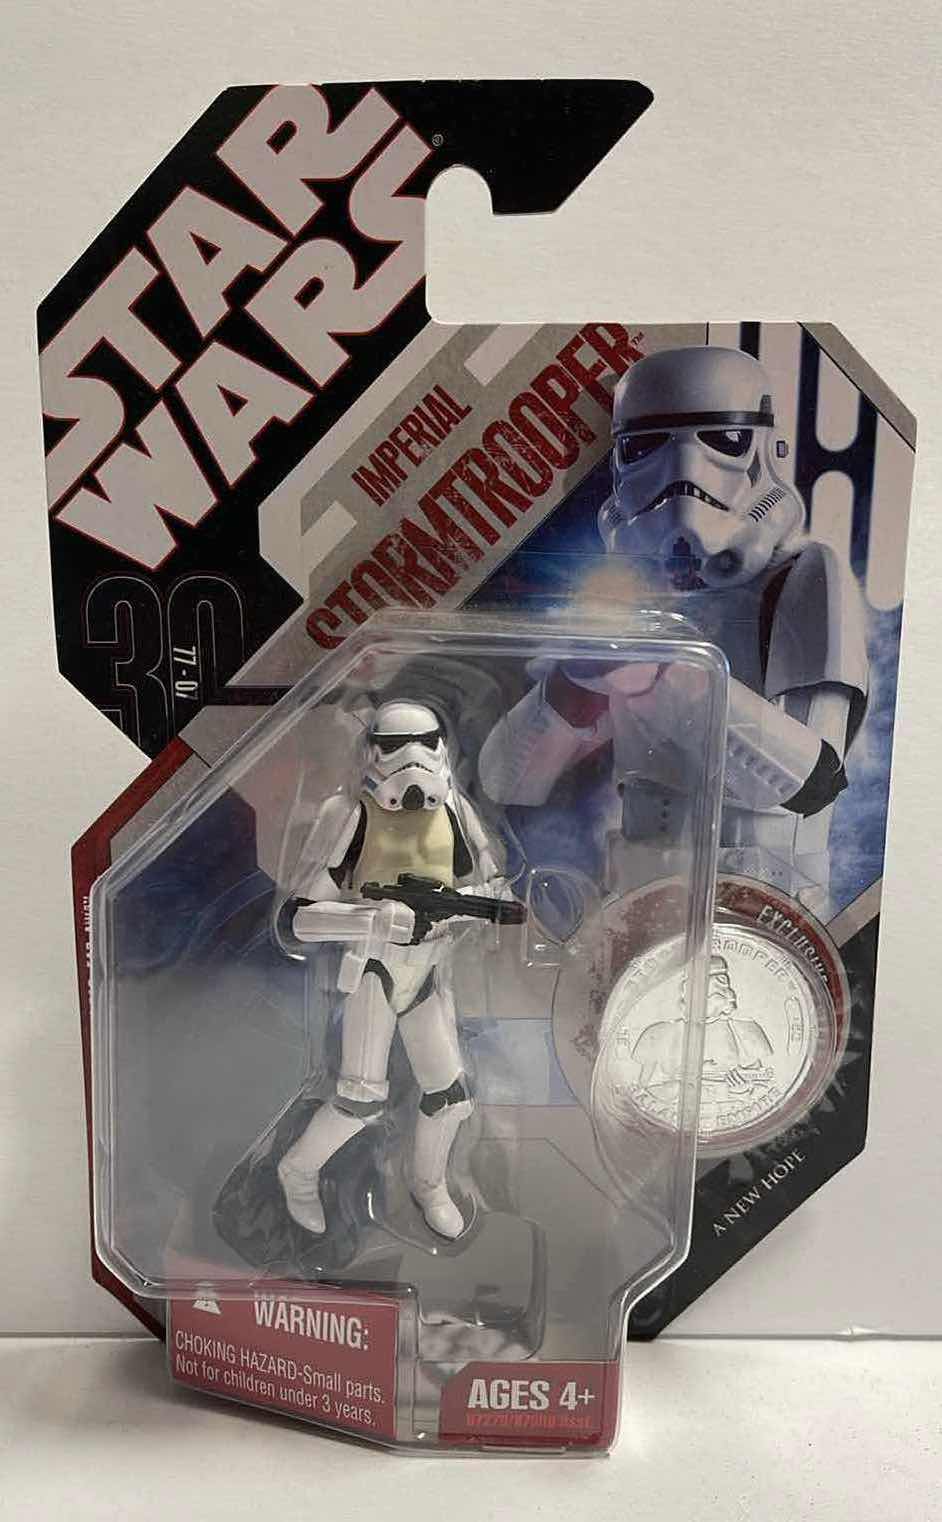 Photo 1 of NIB STAR WARS A NEW HOPE 2007 30TH ANNIVERSARY WAVE 3 IMPERIAL STORMTROOPER ACTION FIGURE #20 - RETAIL PRICE $20.00